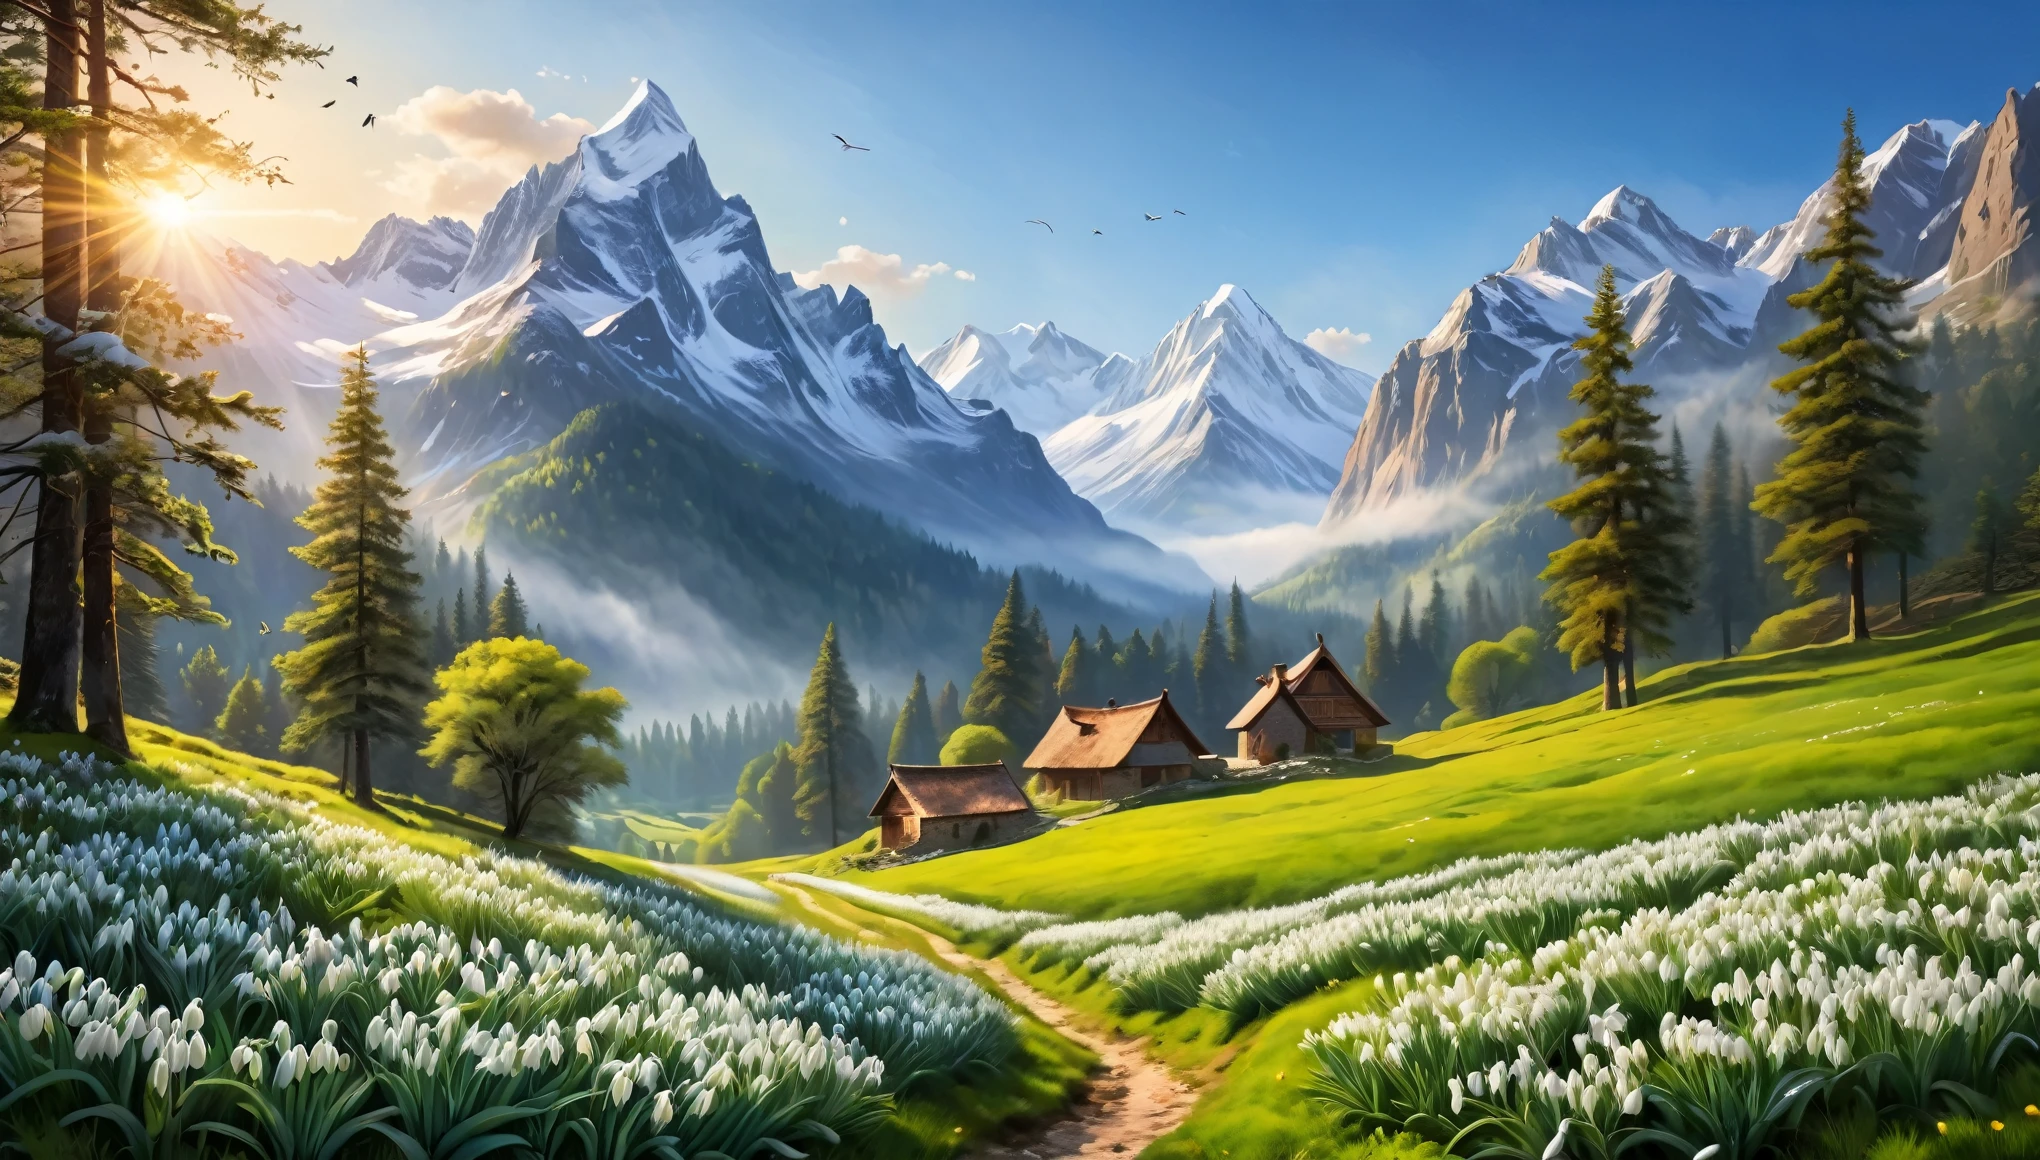 (masterpiece:1.2,best quality,realistic) majestic mountains, (beautiful view, vibrant colors), (snow-capped peaks), (lush greenery), (refreshing spring morning), (soft mist in the valleys), (blooming snowdrops), (peaceful atmosphere), (serene and calm), (crisp and clean air), (tranquility and serenity), (birds chirping), (clear blue sky), (gentle breeze), (sunlight filtering through the trees), (dramatic lighting), (impressive scale), (stunning landscapes), (captivating beauty), (awe-inspiring vistas), (sheer grandeur), (majestic mountain range), (imposing presence), (harmony with nature), (stunning details), (immersive experience), (deep sense of peace), (sense of wonder), (timeless beauty), (ethereal ambiance), (unforgettable sight), (mind-blowing panorama), (scenic beauty), (breathtaking view), (emotional connection), (artistic craftsmanship), (exquisite attention to detail), (impressive realism), (masterful brushstrokes), (meticulous composition), (unparalleled artistry), (immersive atmosphere), (visual feast for the eyes).